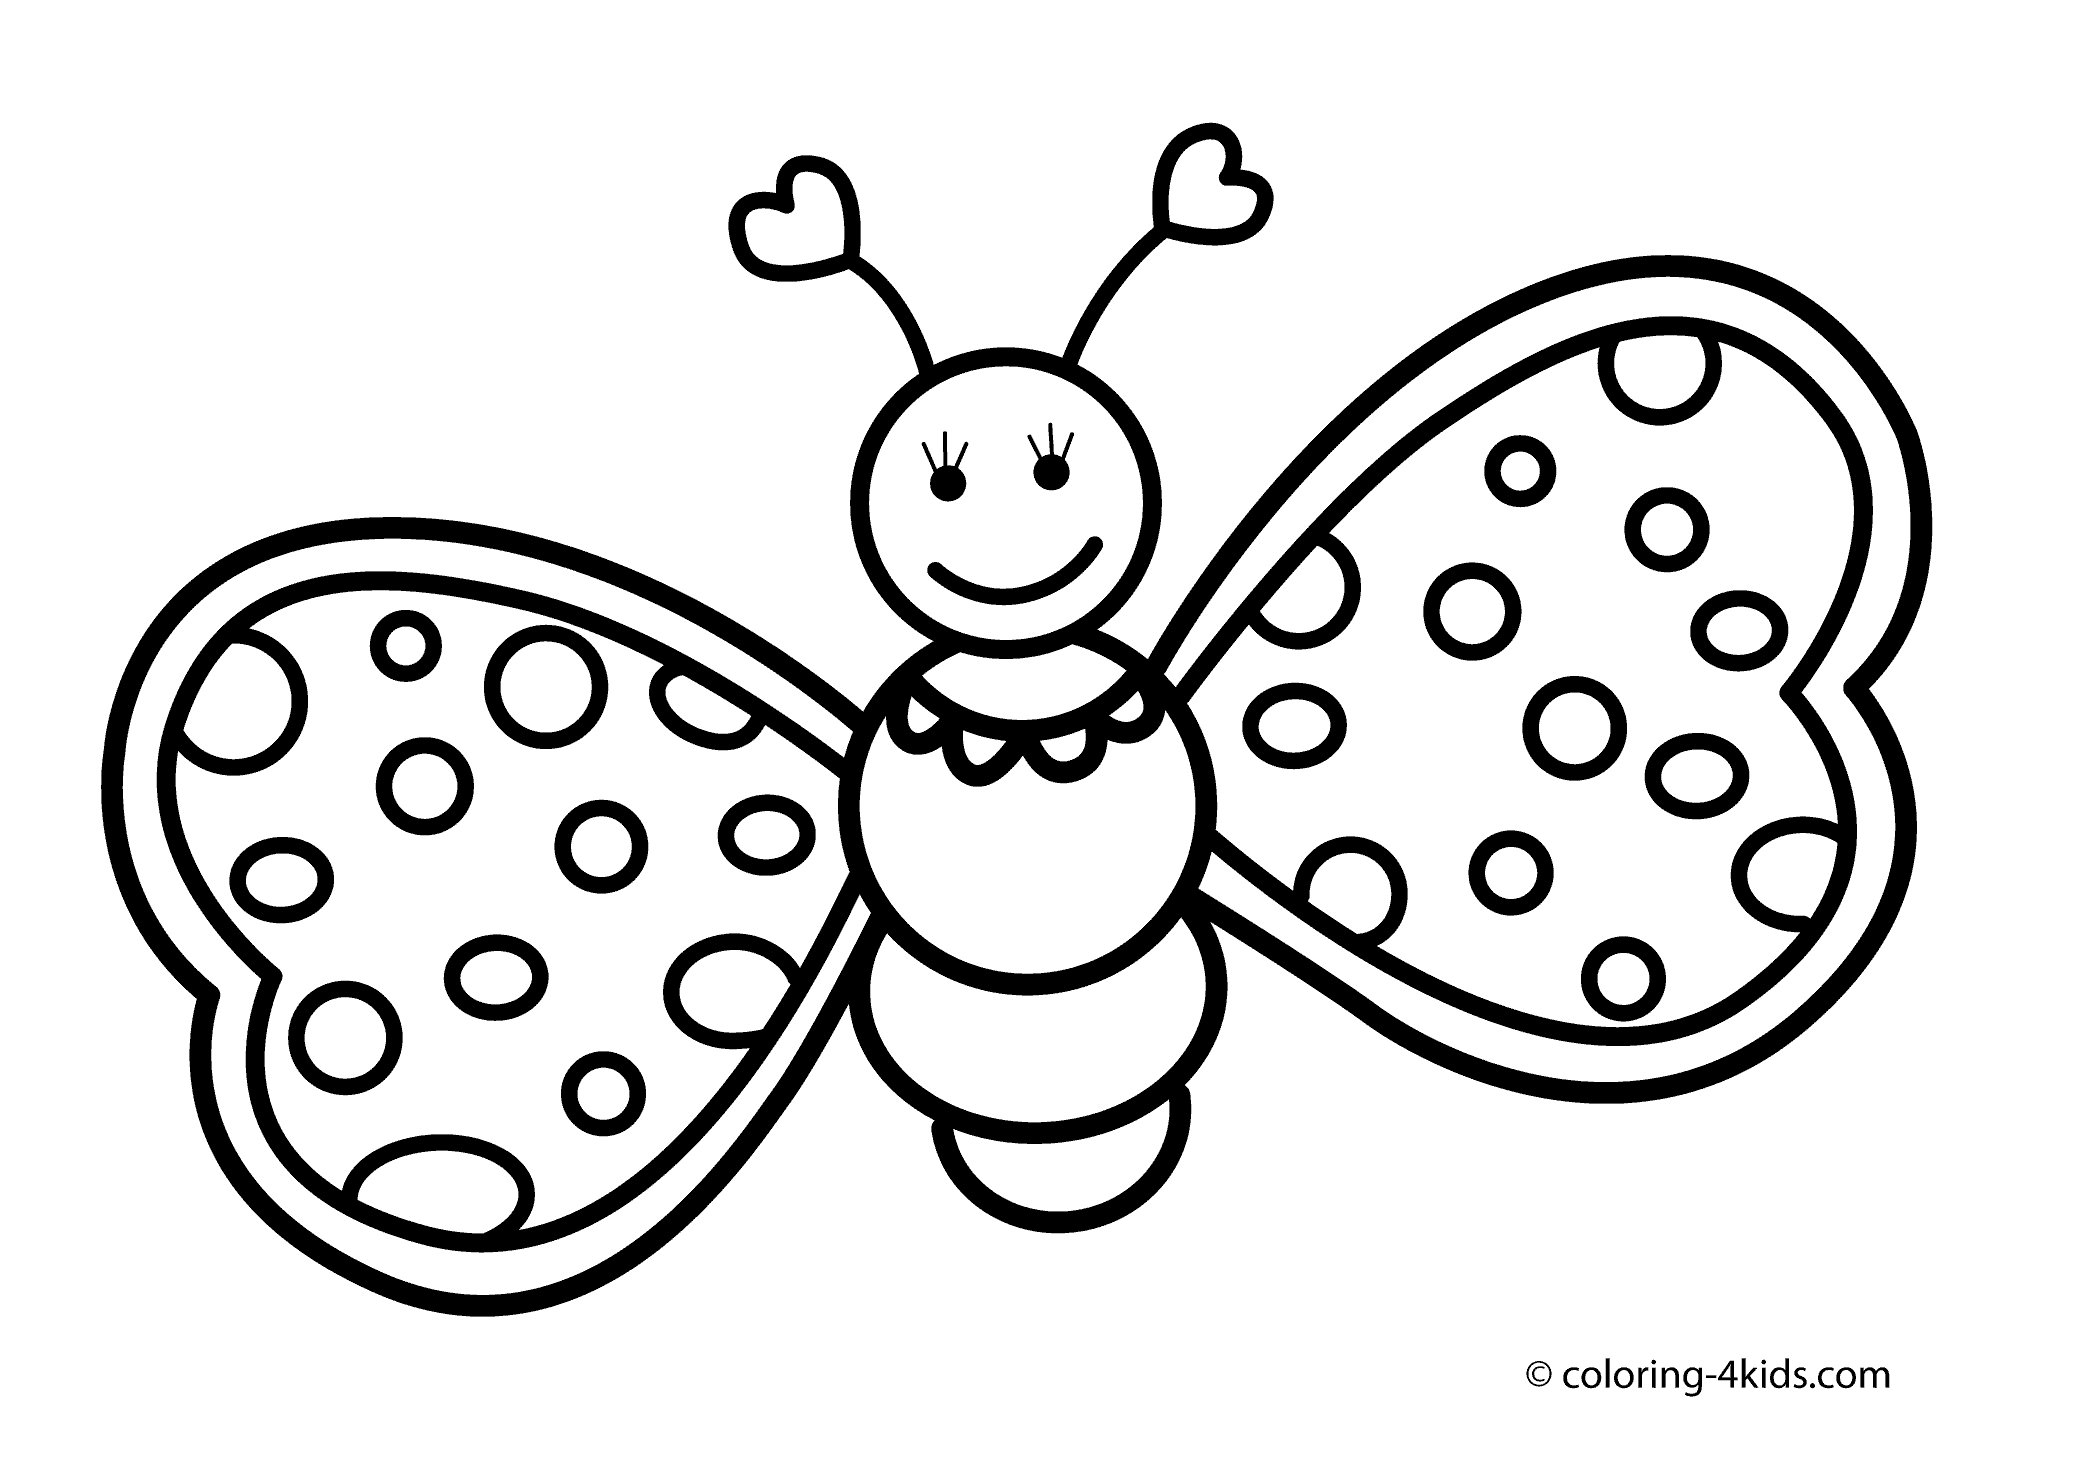 Butterfly Coloring Pages For Toddlers   Coloring Pages For All ...